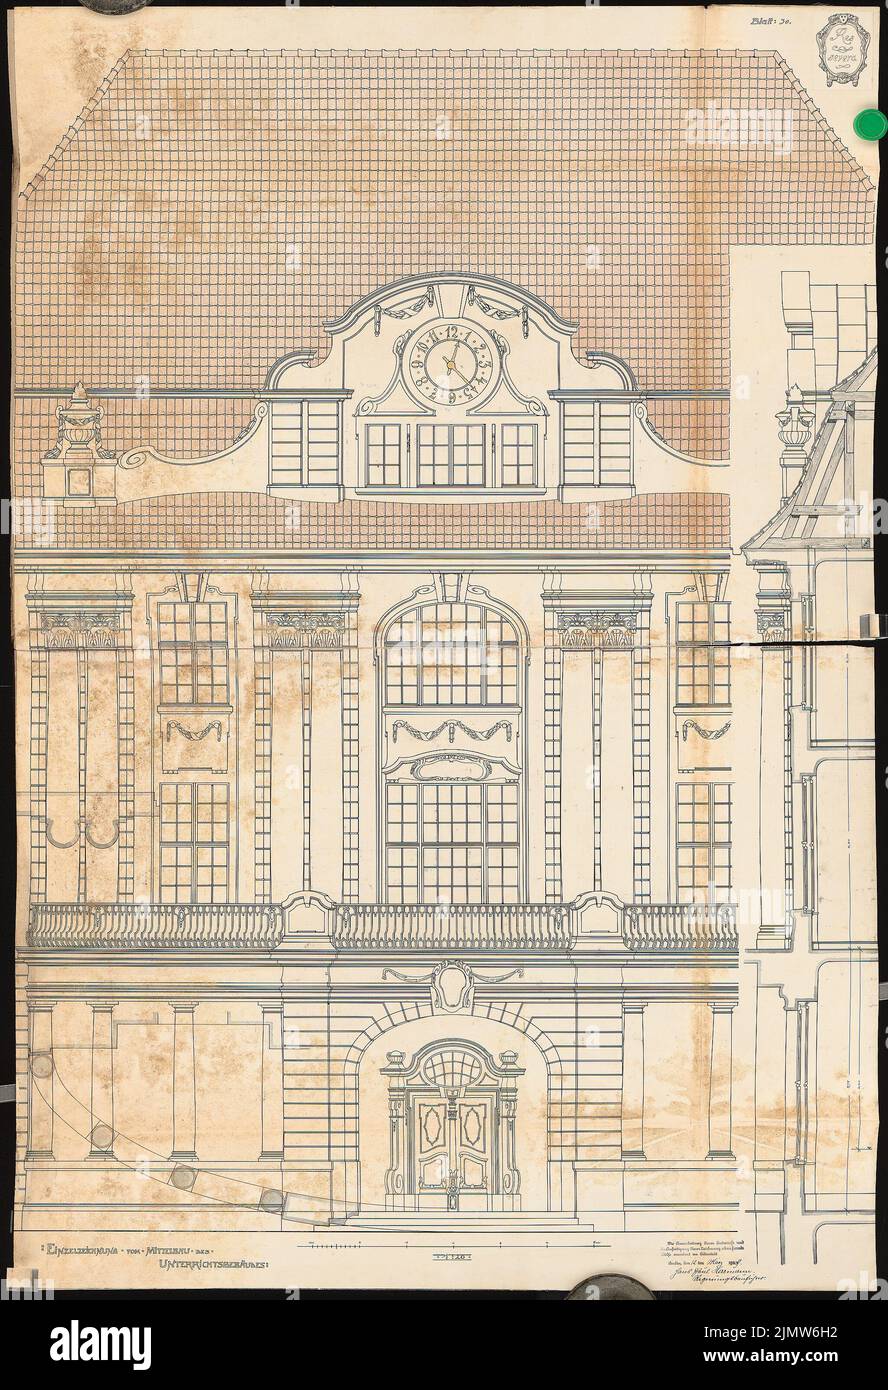 Herrmann Hans Paul (born 1882), educational home. Schinkel competition 1909: teaching building. View of the middle construction (excerpt) 1:20. Tusche watercolor on the box, 139.70 x 91.50 cm (including scan edge). Architecture Museum of the Technical University of Berlin Inv. No. SW-A 1909-30. Herrmann Hans Paul  (geb. 1882): Erziehungsheim. Schinkelwettbewerb 1909 Stock Photo